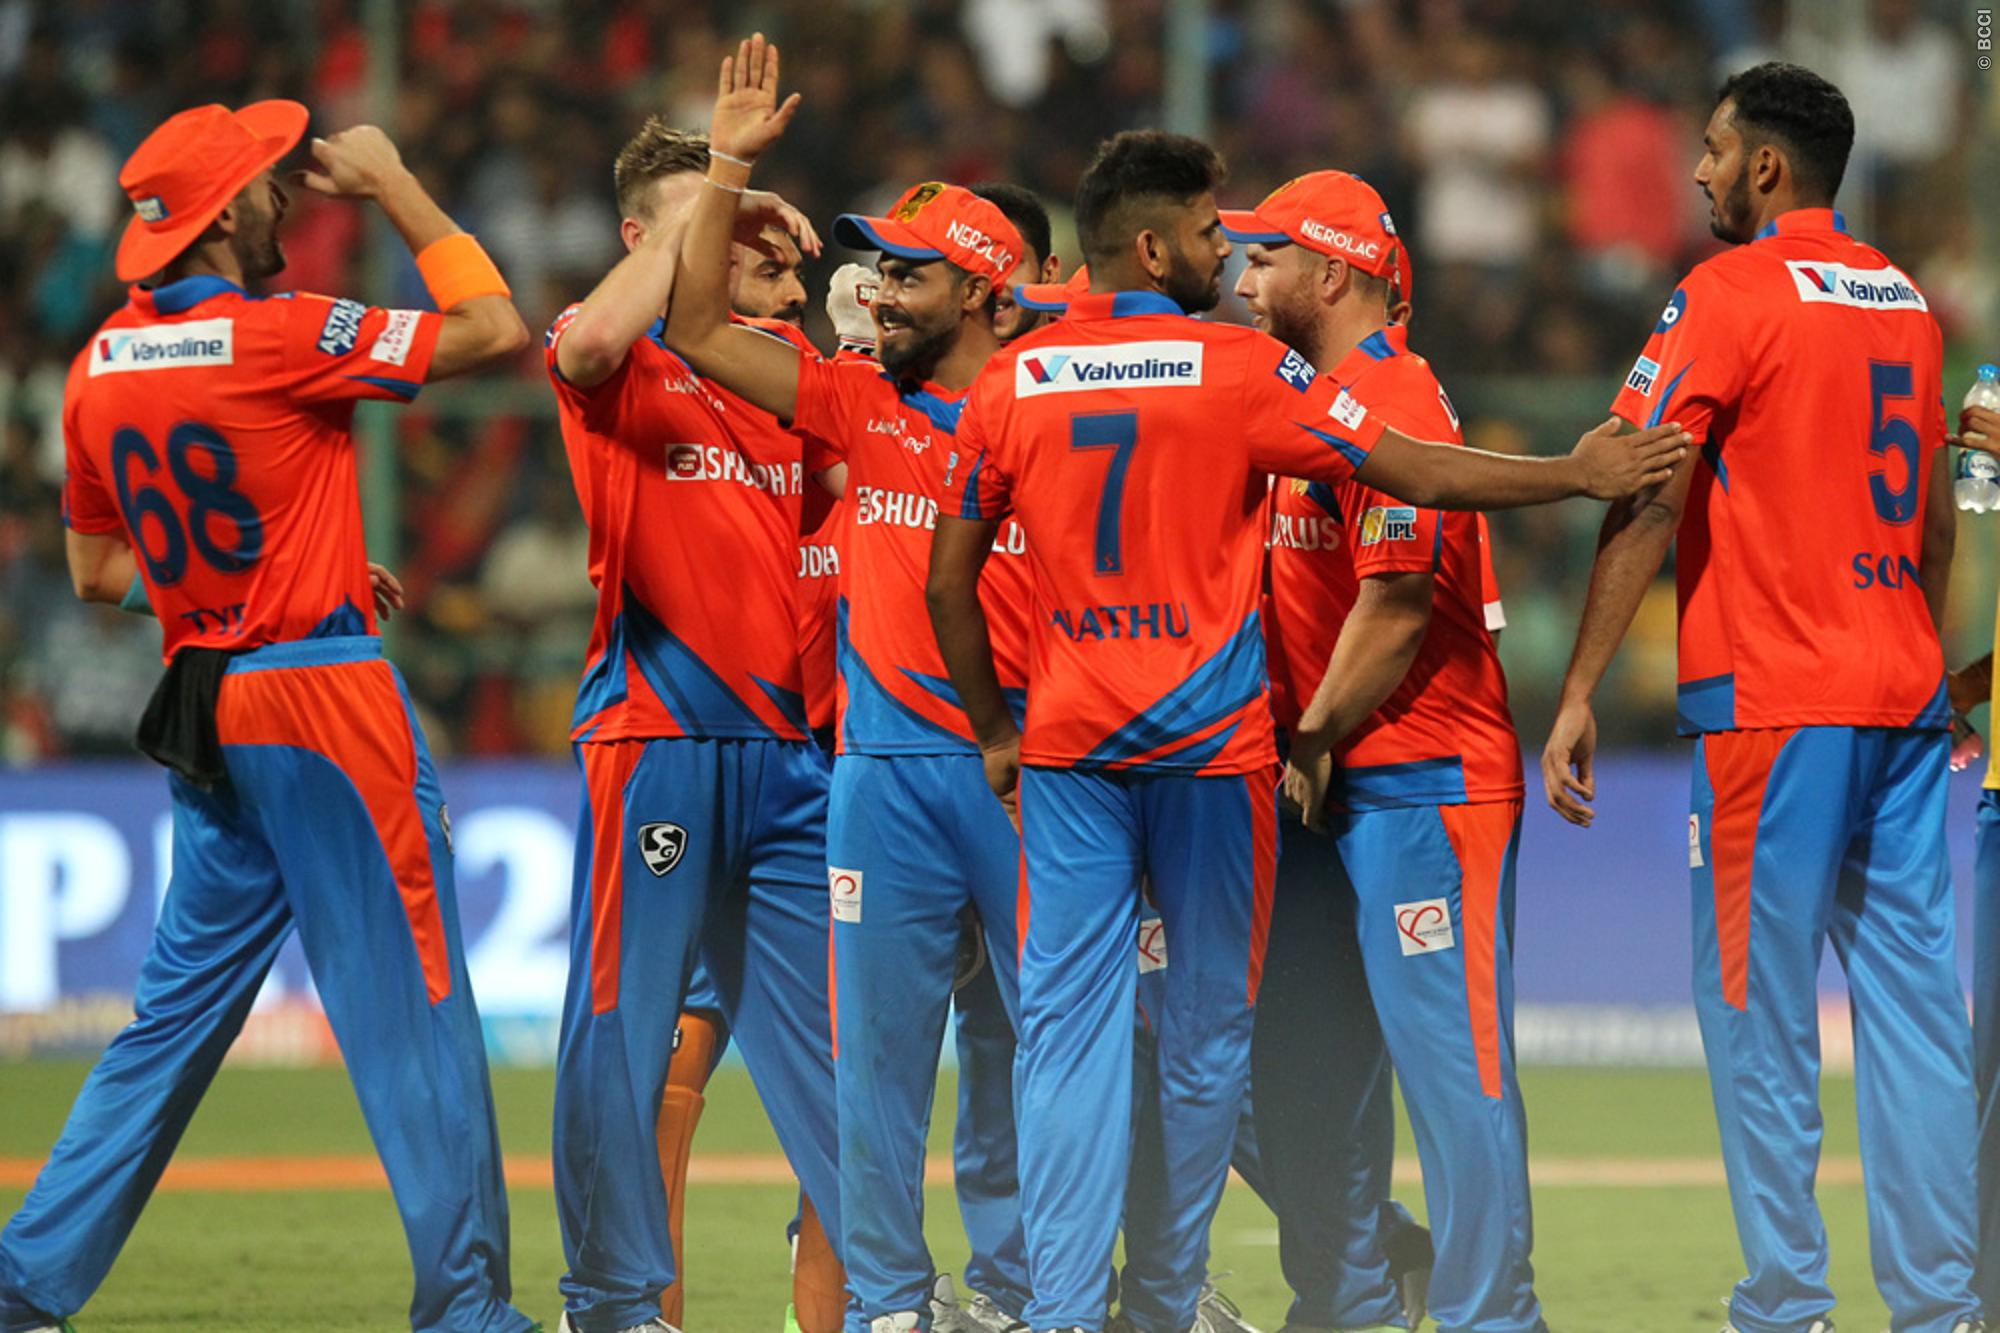 Watch: Gujarat's fielding efforts gets them a shot at victory